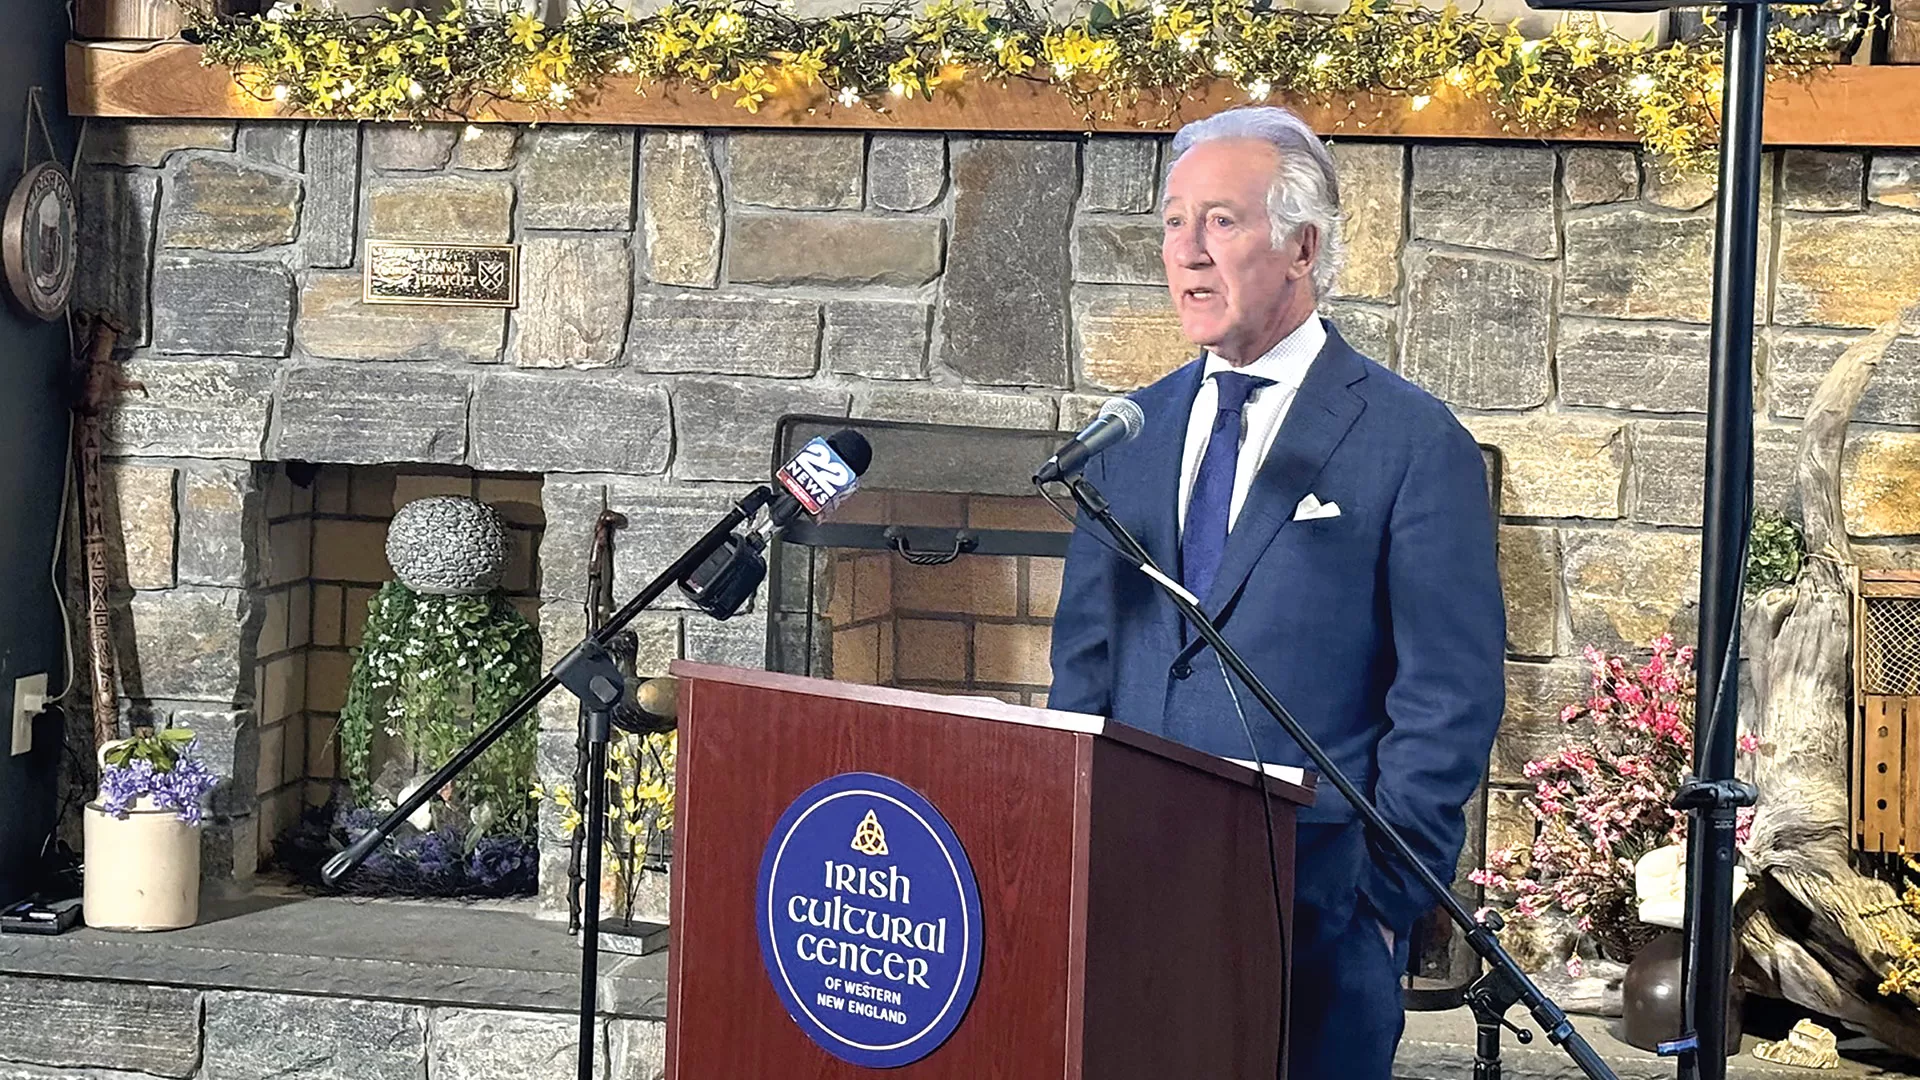 U.S. Rep. Richard Neal, honorary campaign chair, speaks at the reception